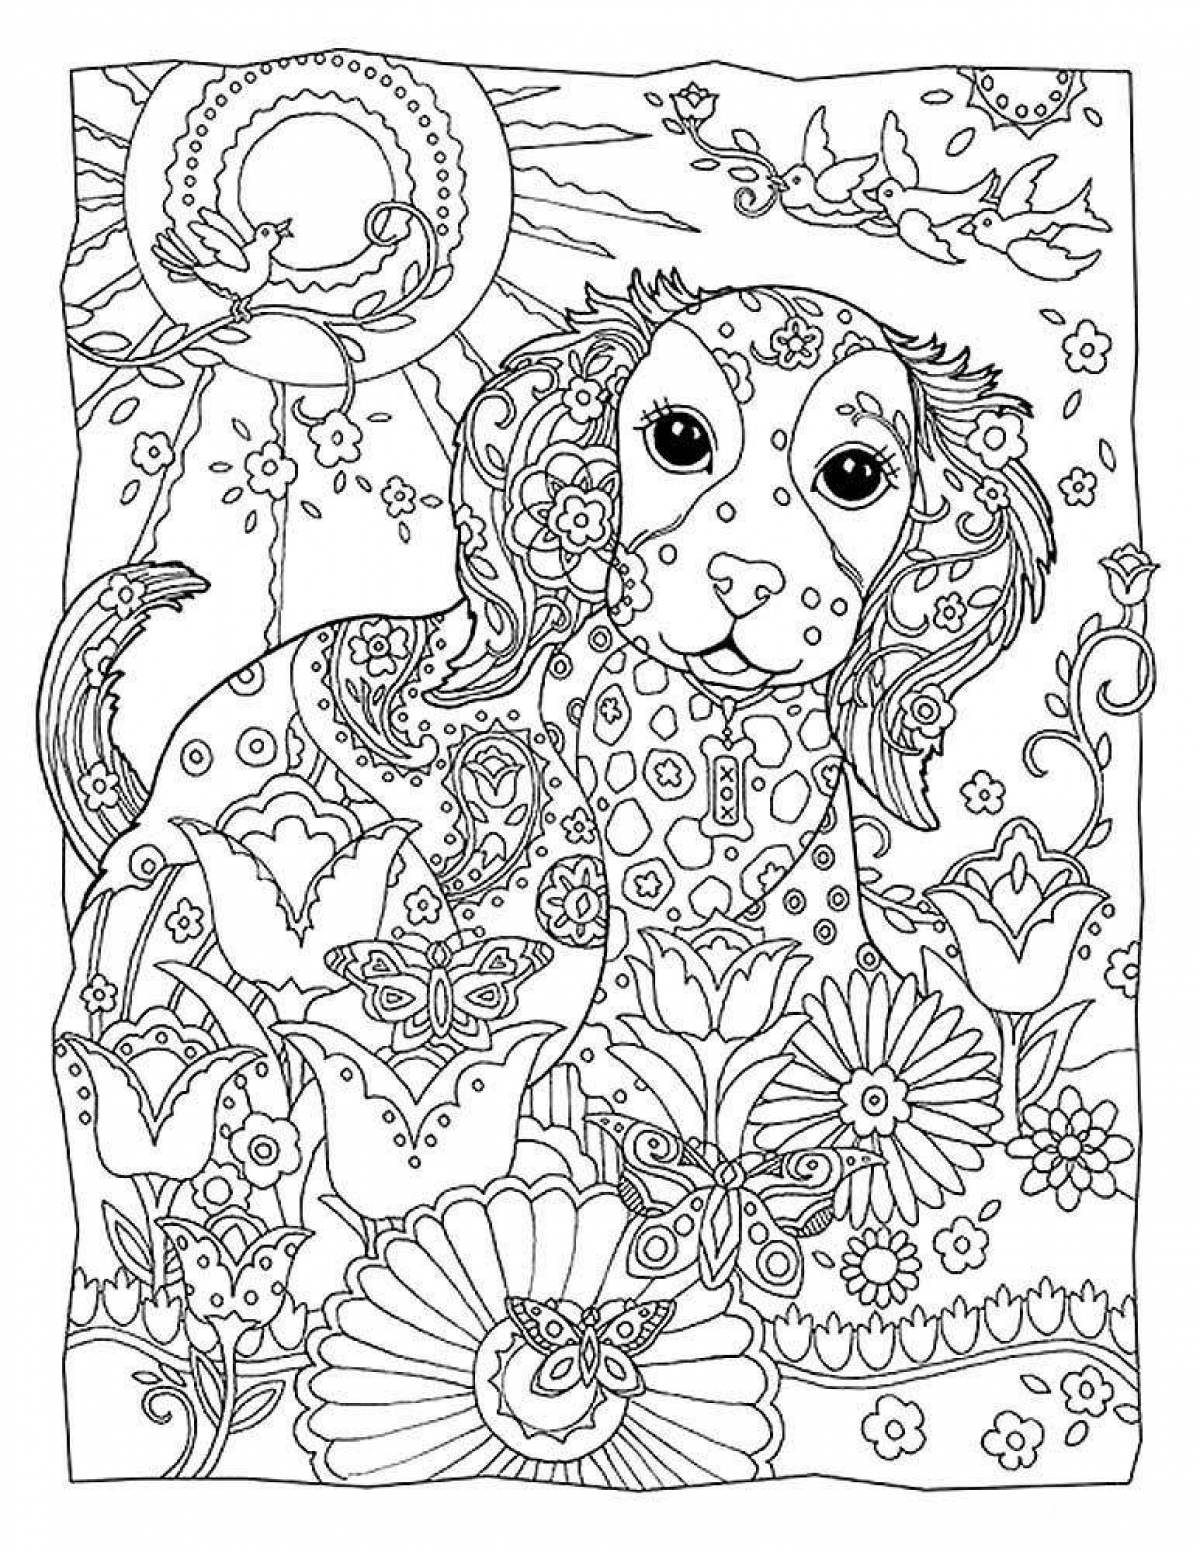 Joyful coloring for girls 10 years old